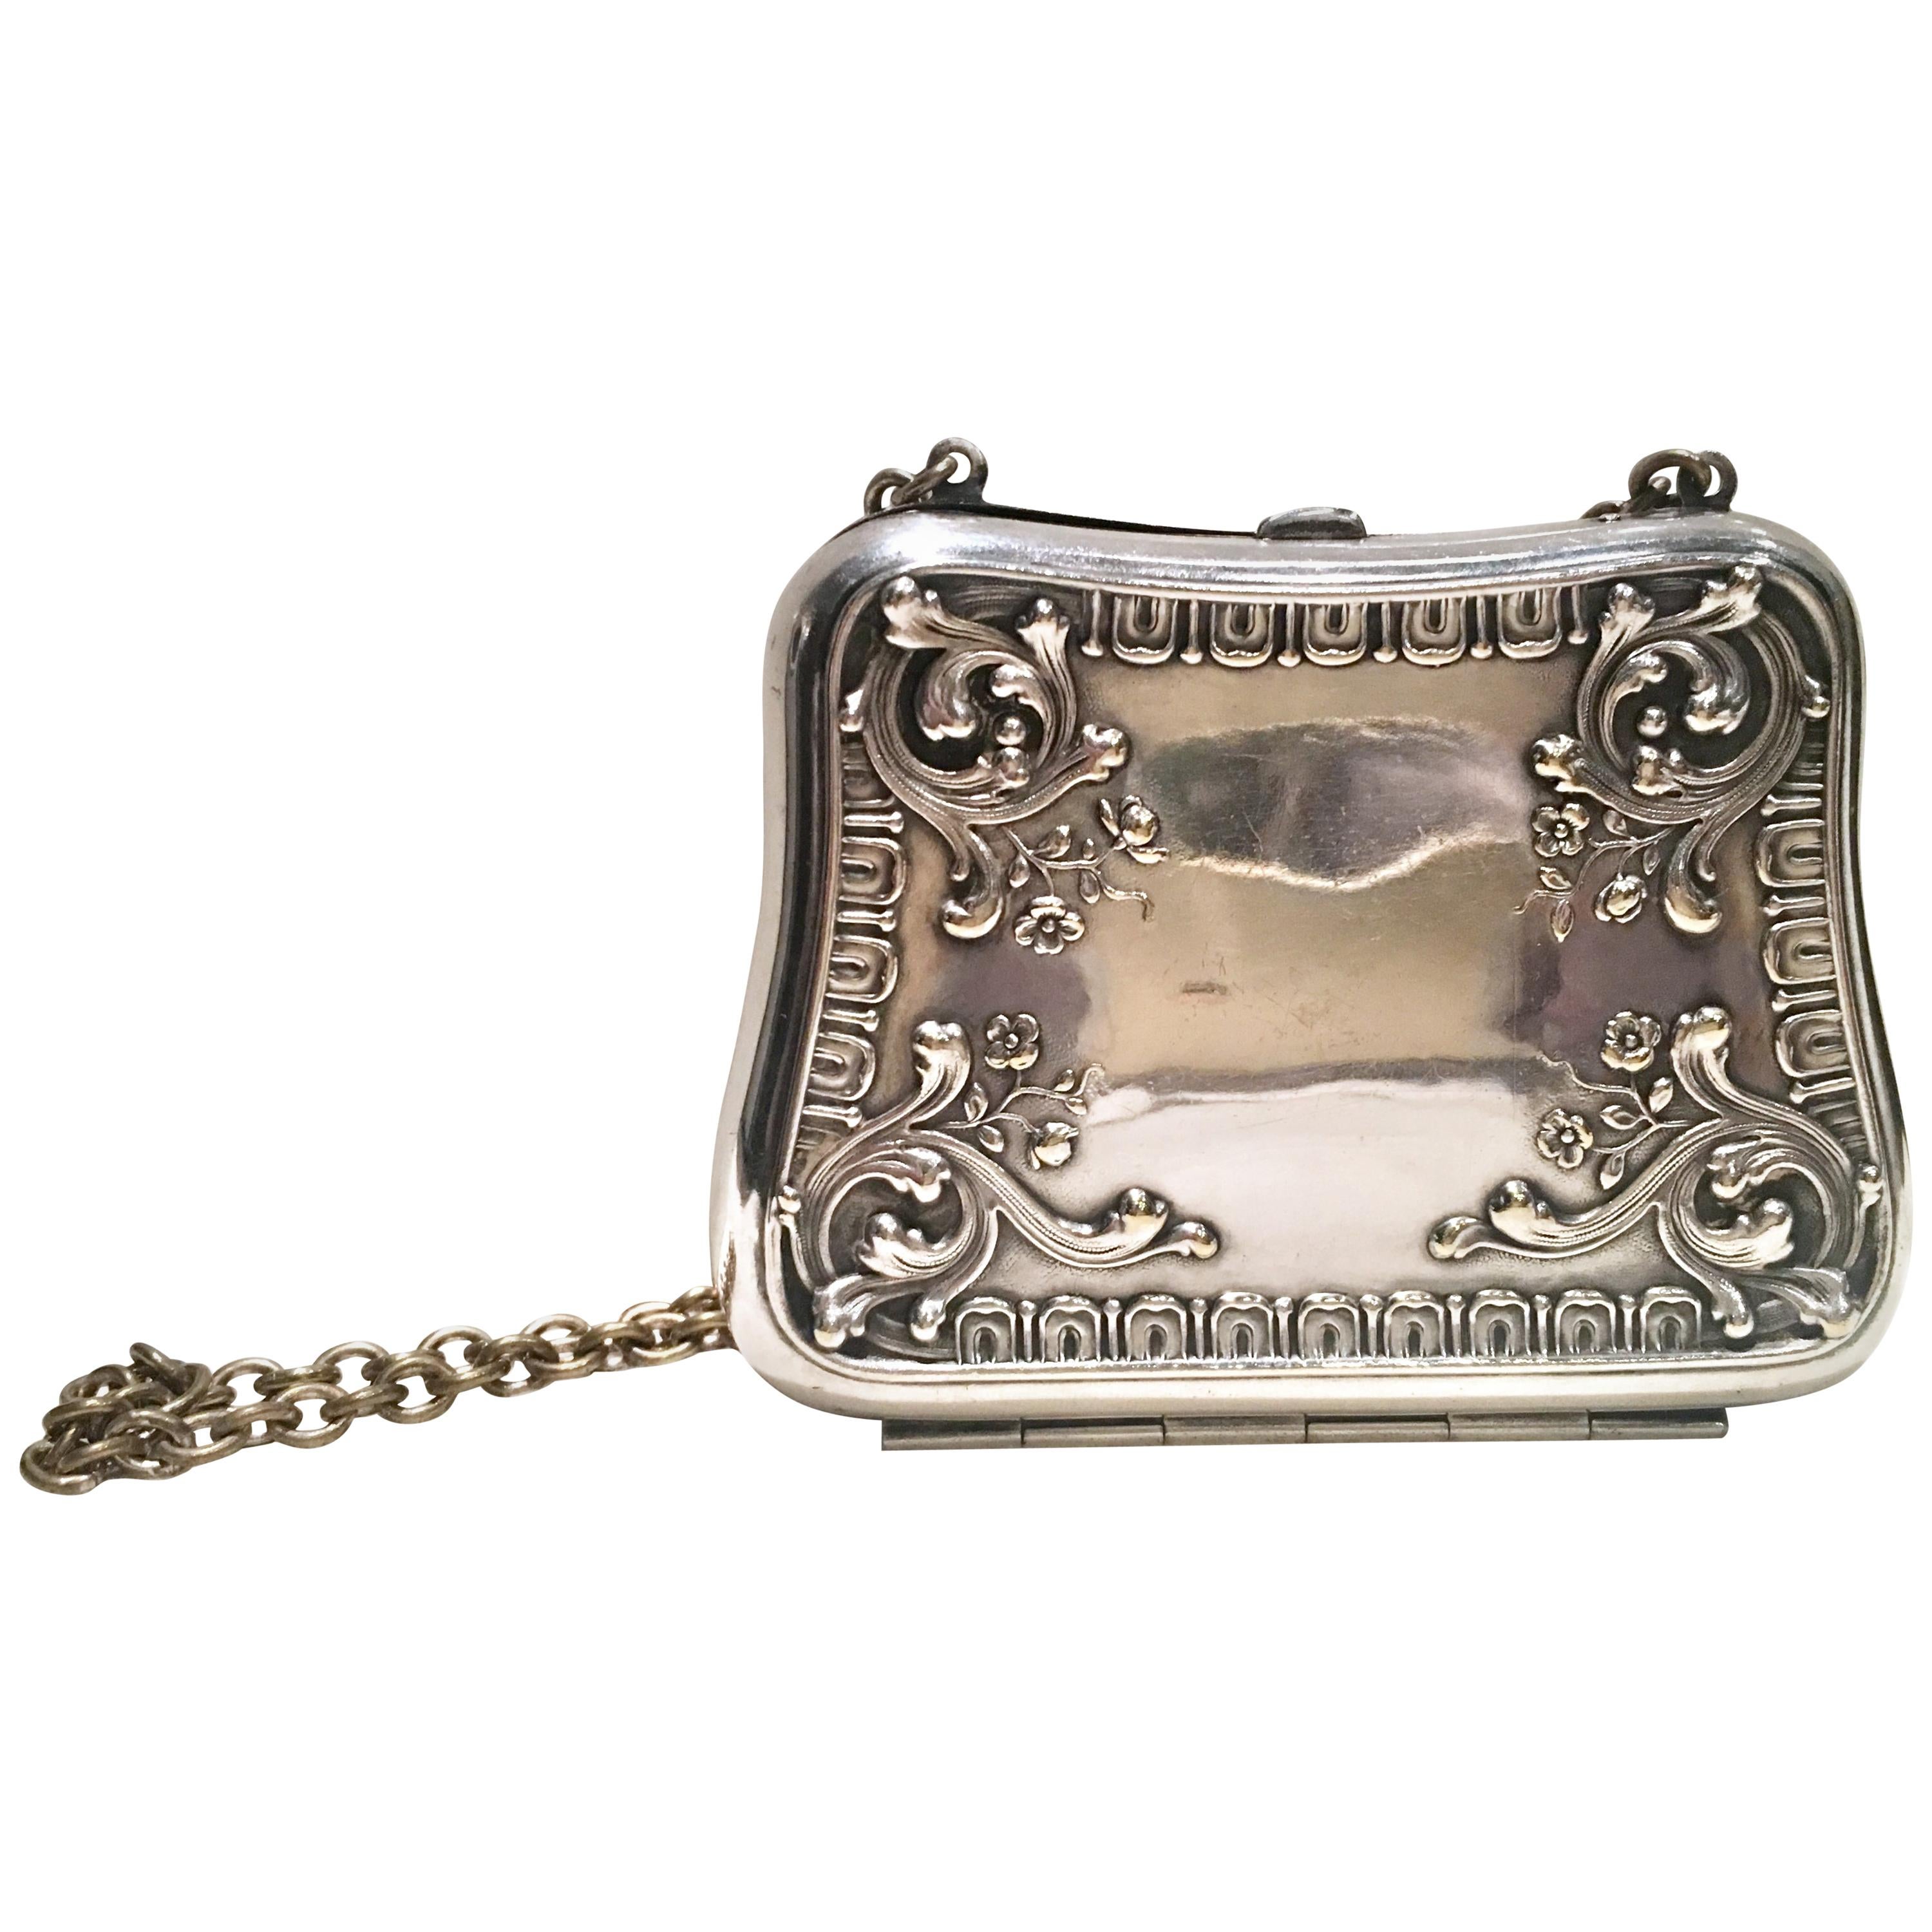 Authentic Antique 1900s 1920 Silver Metal Purse Handbag Frame With Colored  Stones And Jewels - Another Time Vintage Apparel And Other Fine Delights